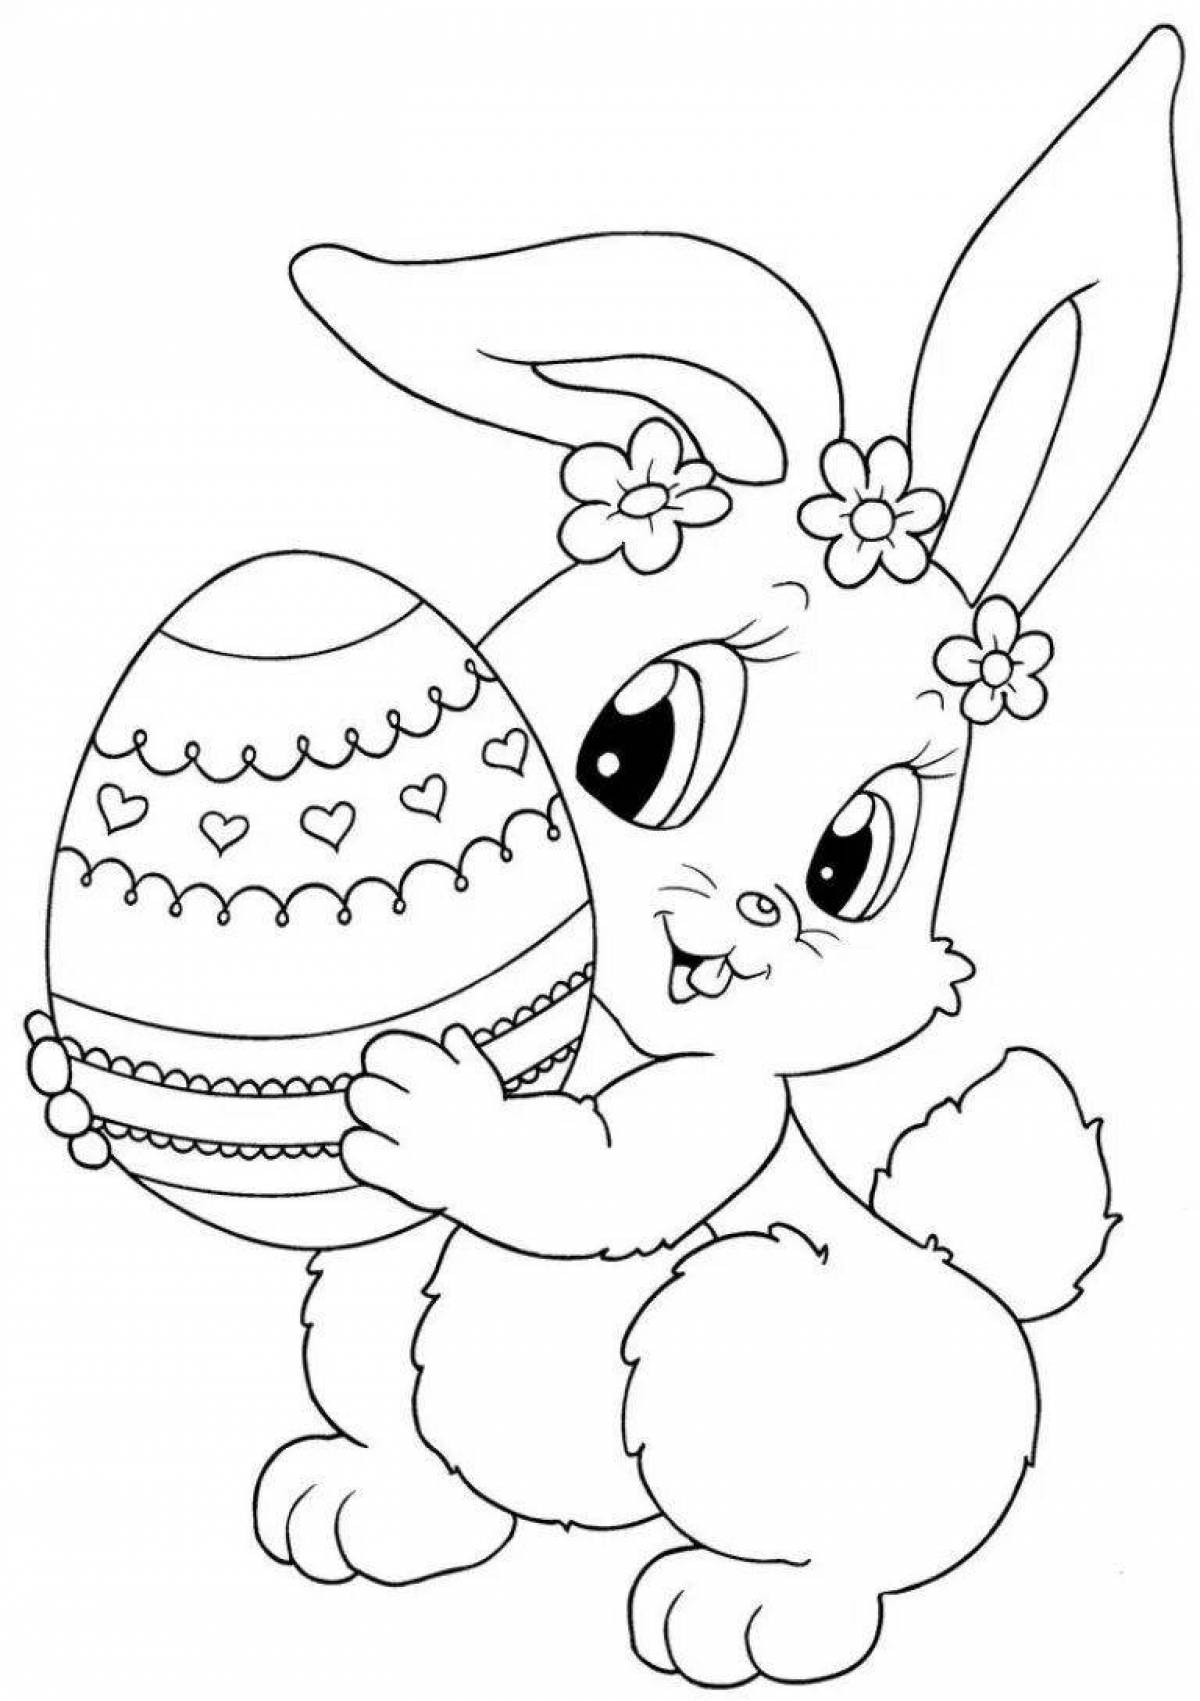 Cute easter bunny coloring book